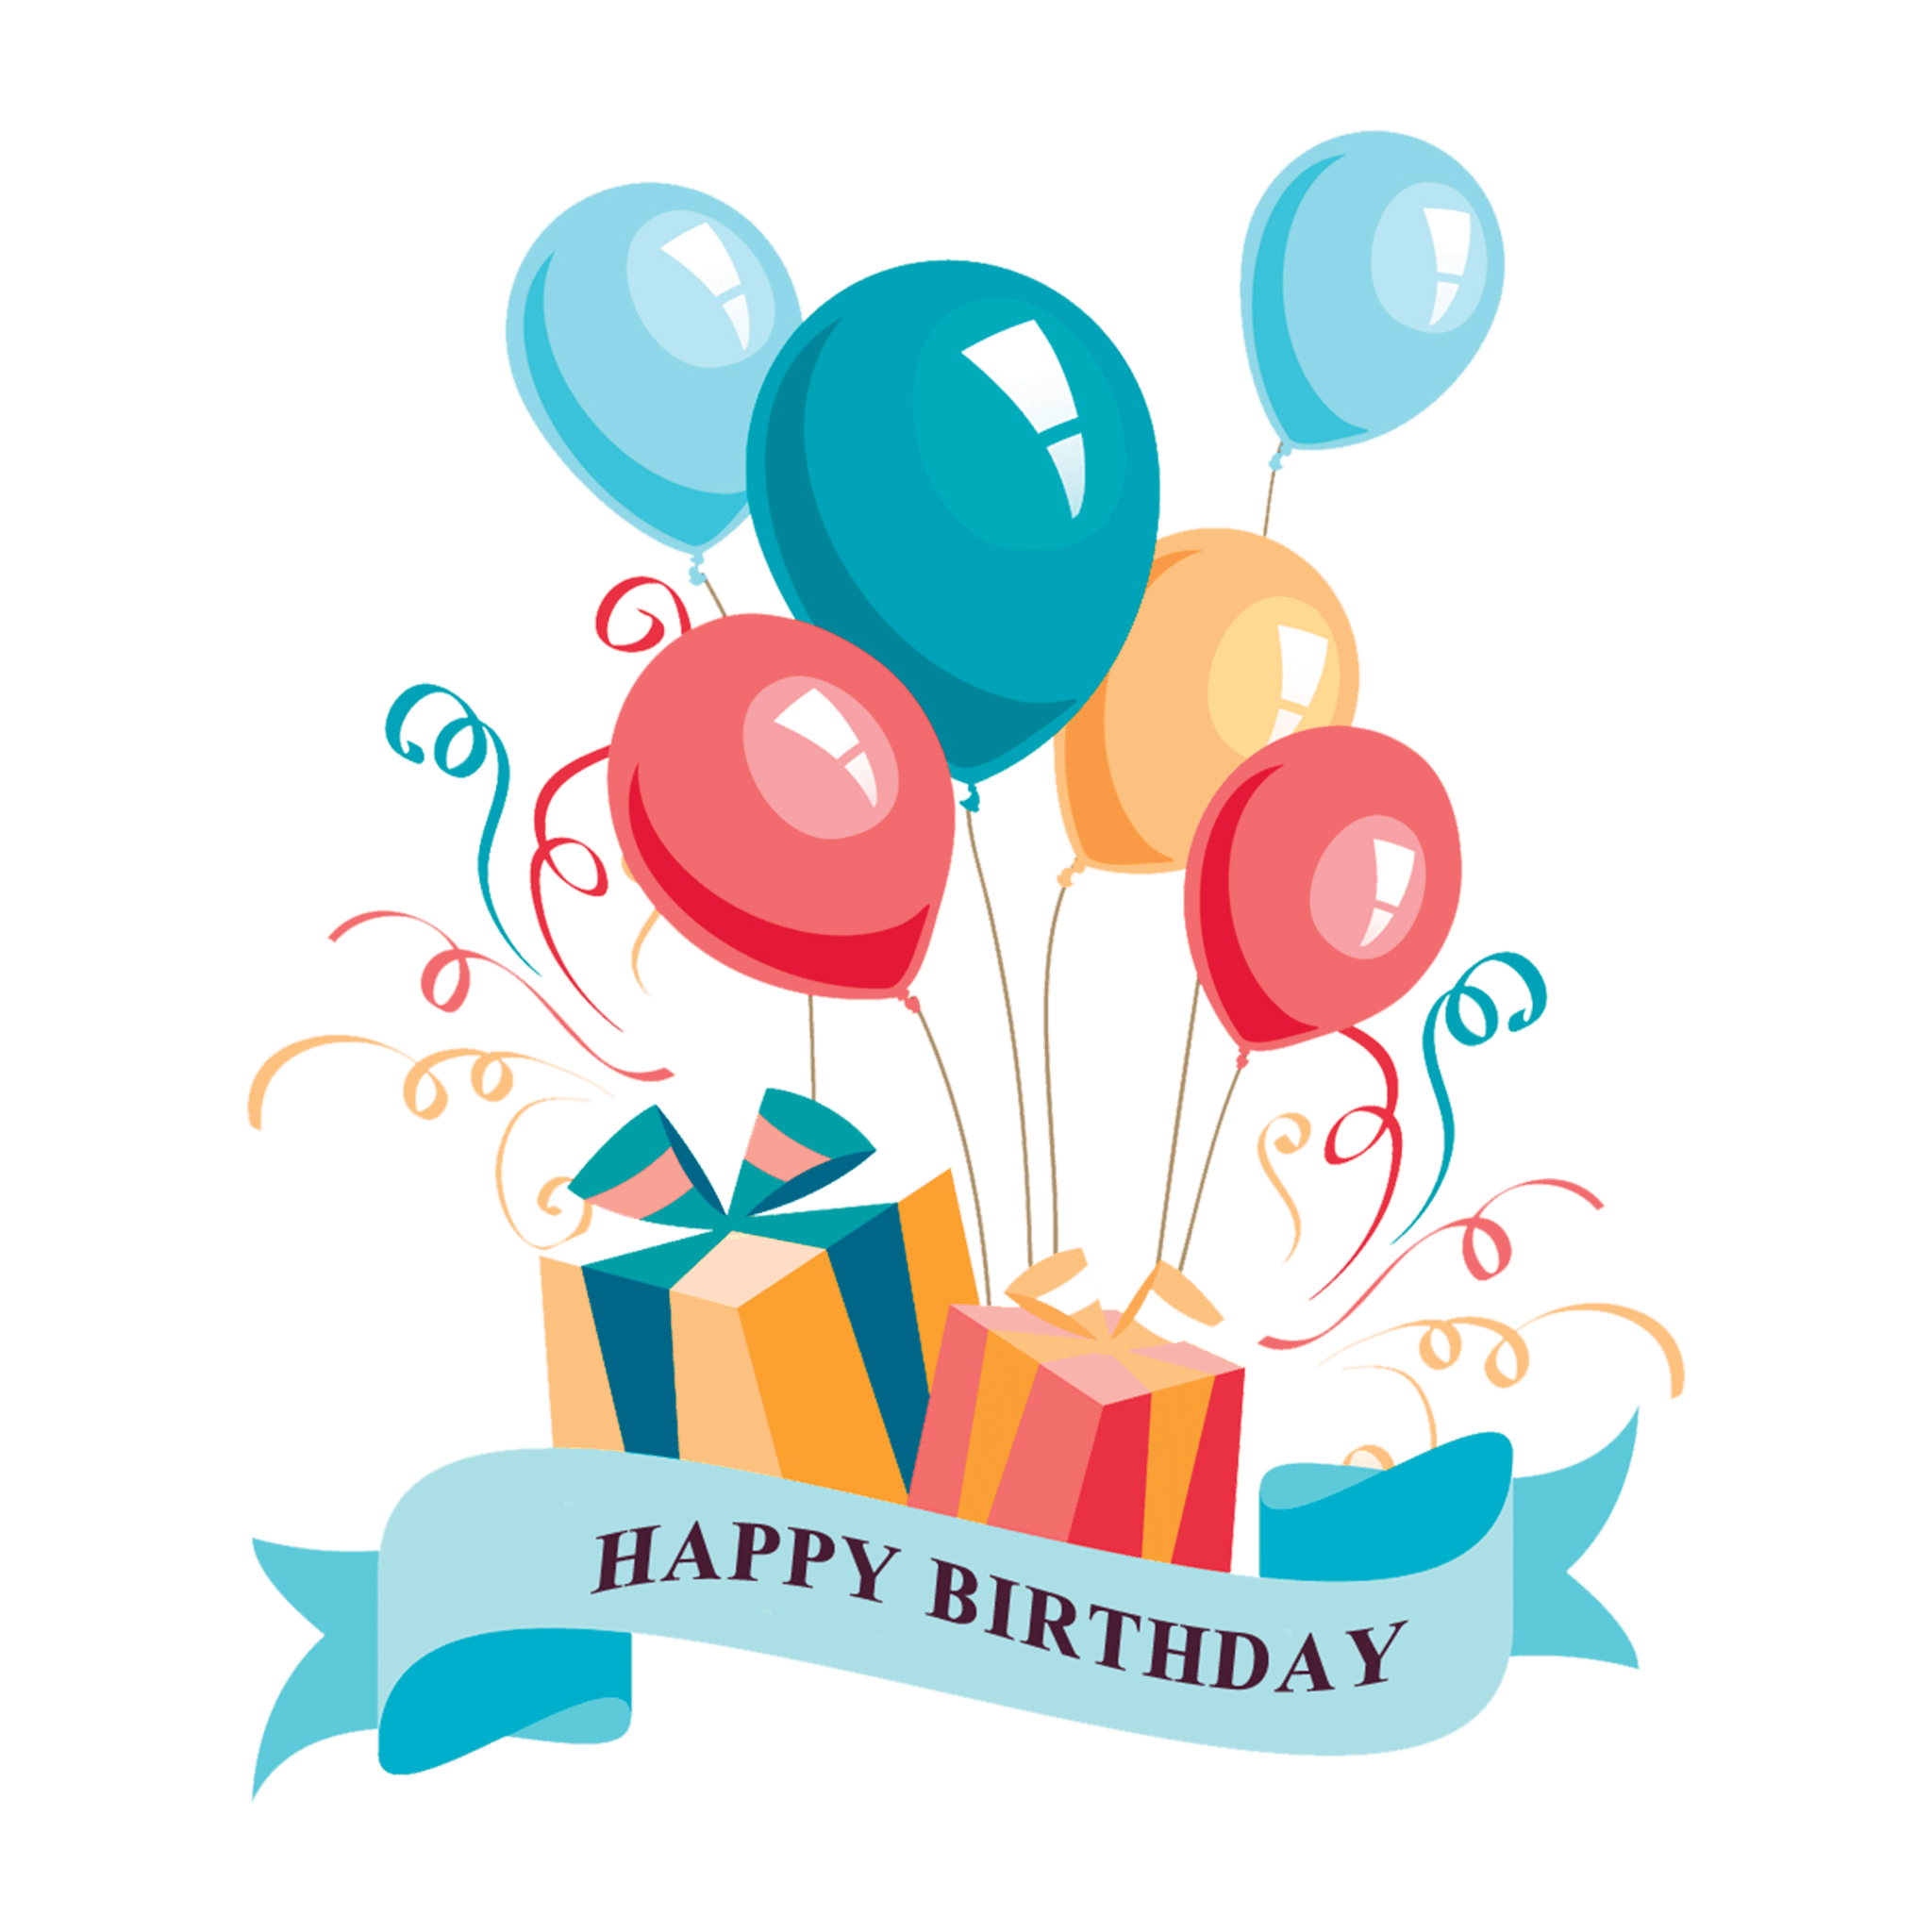 Happy Birthday Clip Art PNG Background